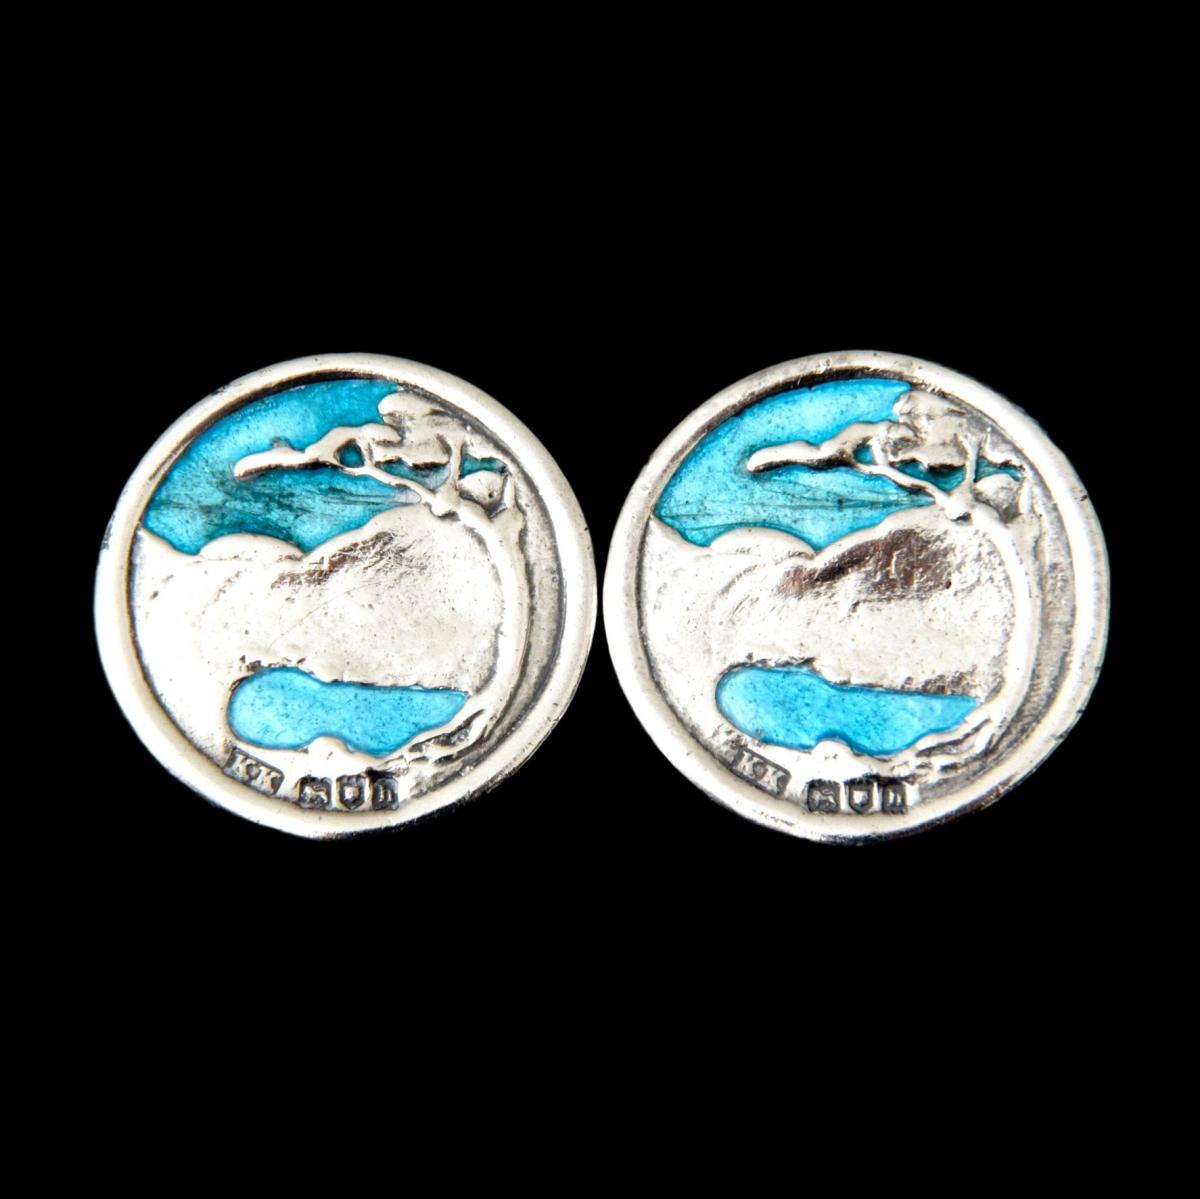 A rare Kate Harris pair of silver and enamel button earrings